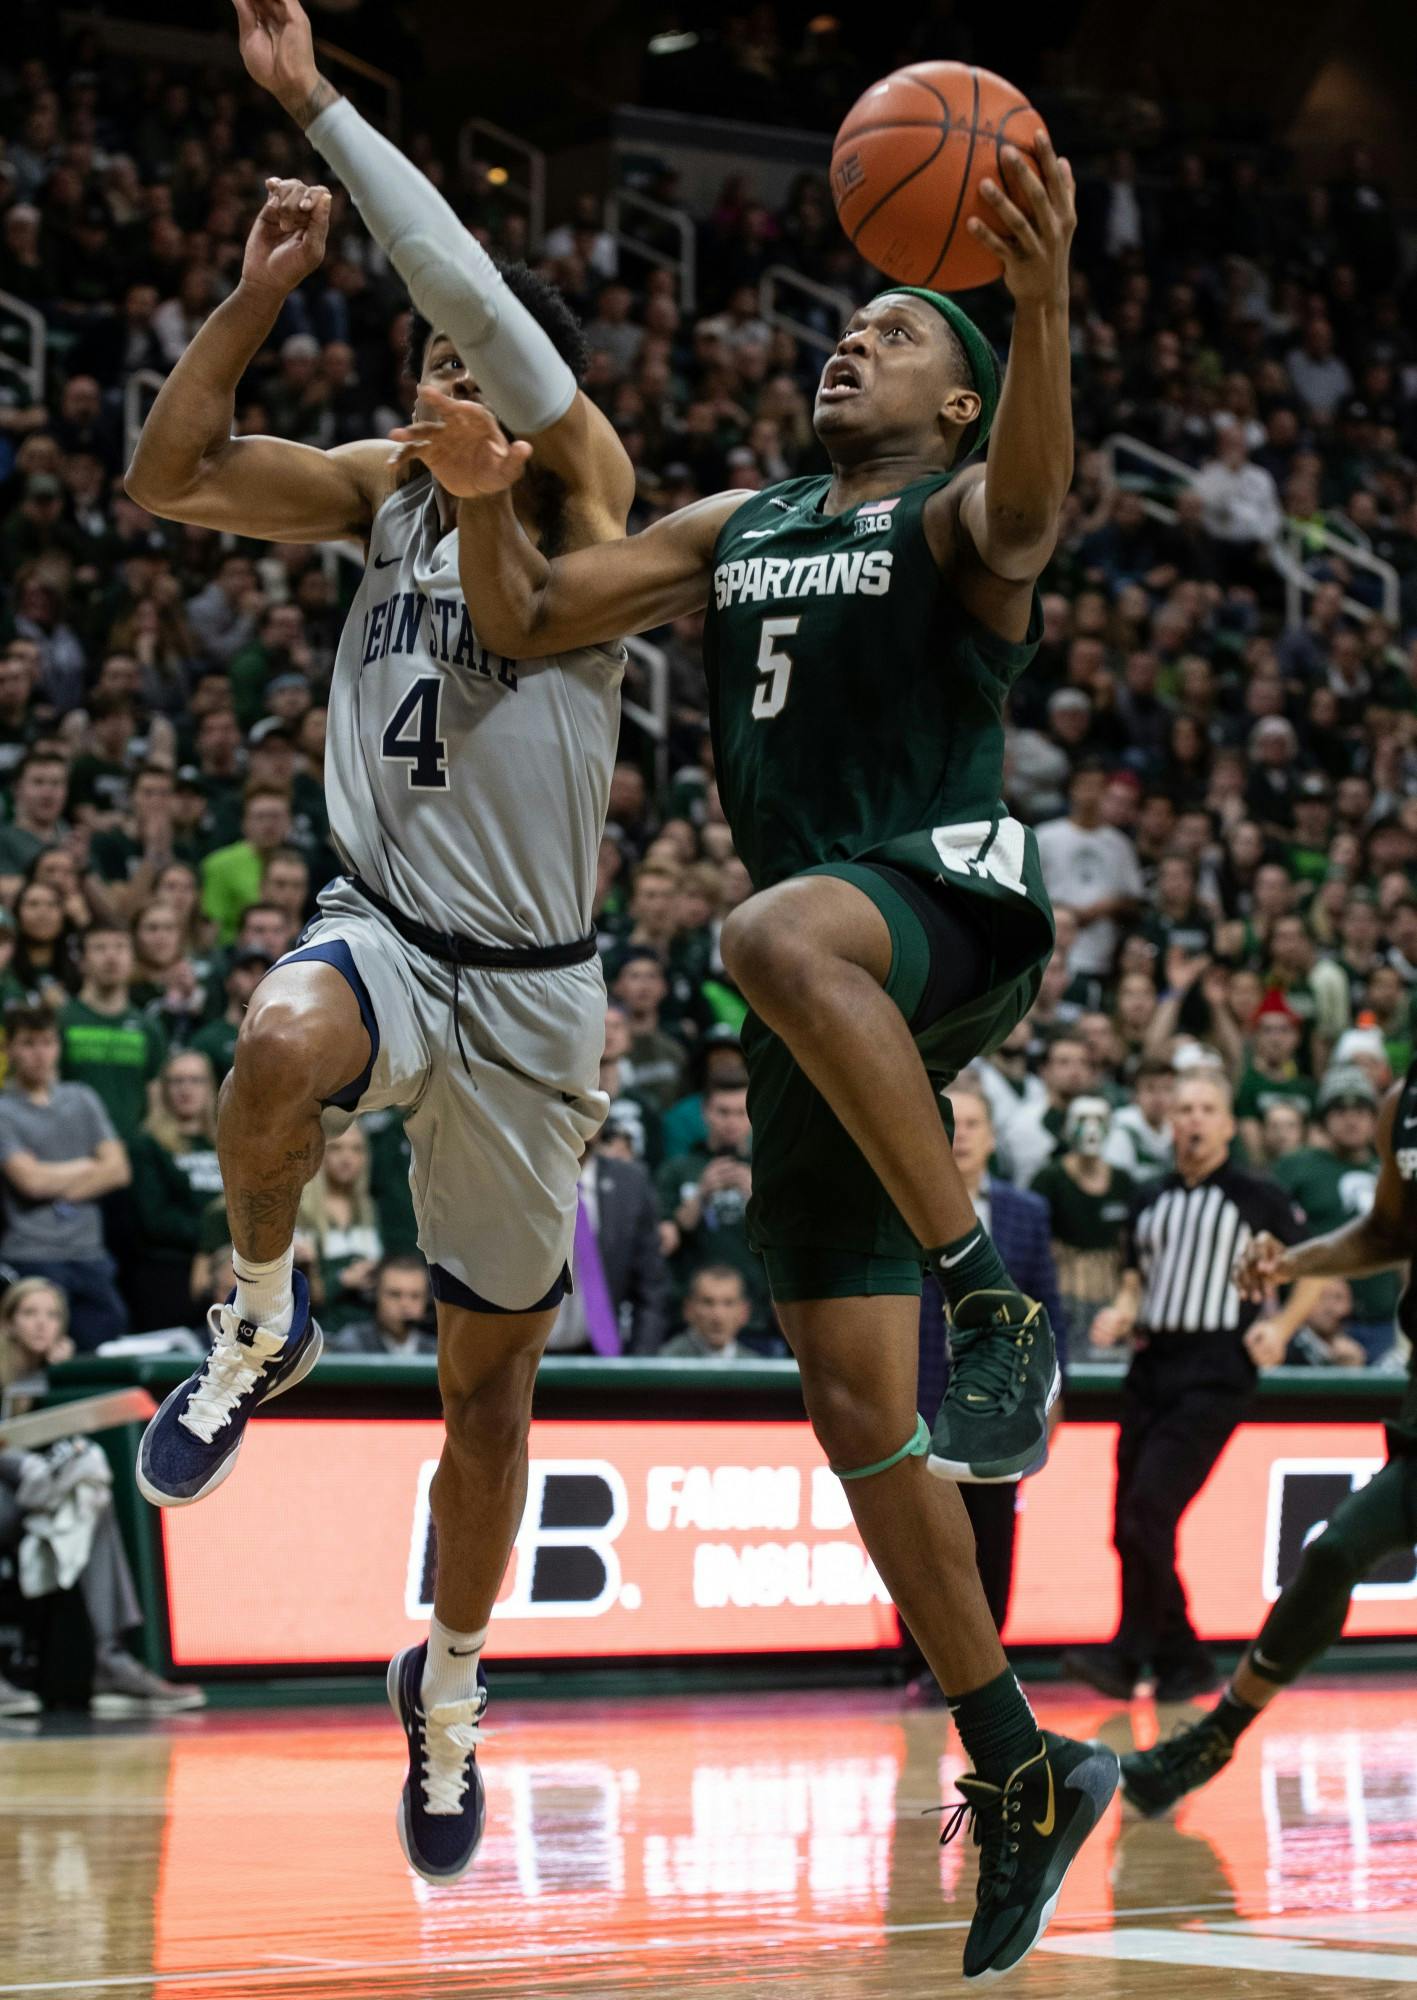 <p>Former MSU player Cassius Winston (5) goes for a lay-up in the final moments of a basketball game against Penn State at the Breslin Center on Feb. 4, 2020. The Spartans fell to the Nittany Lions, 70-75.</p>